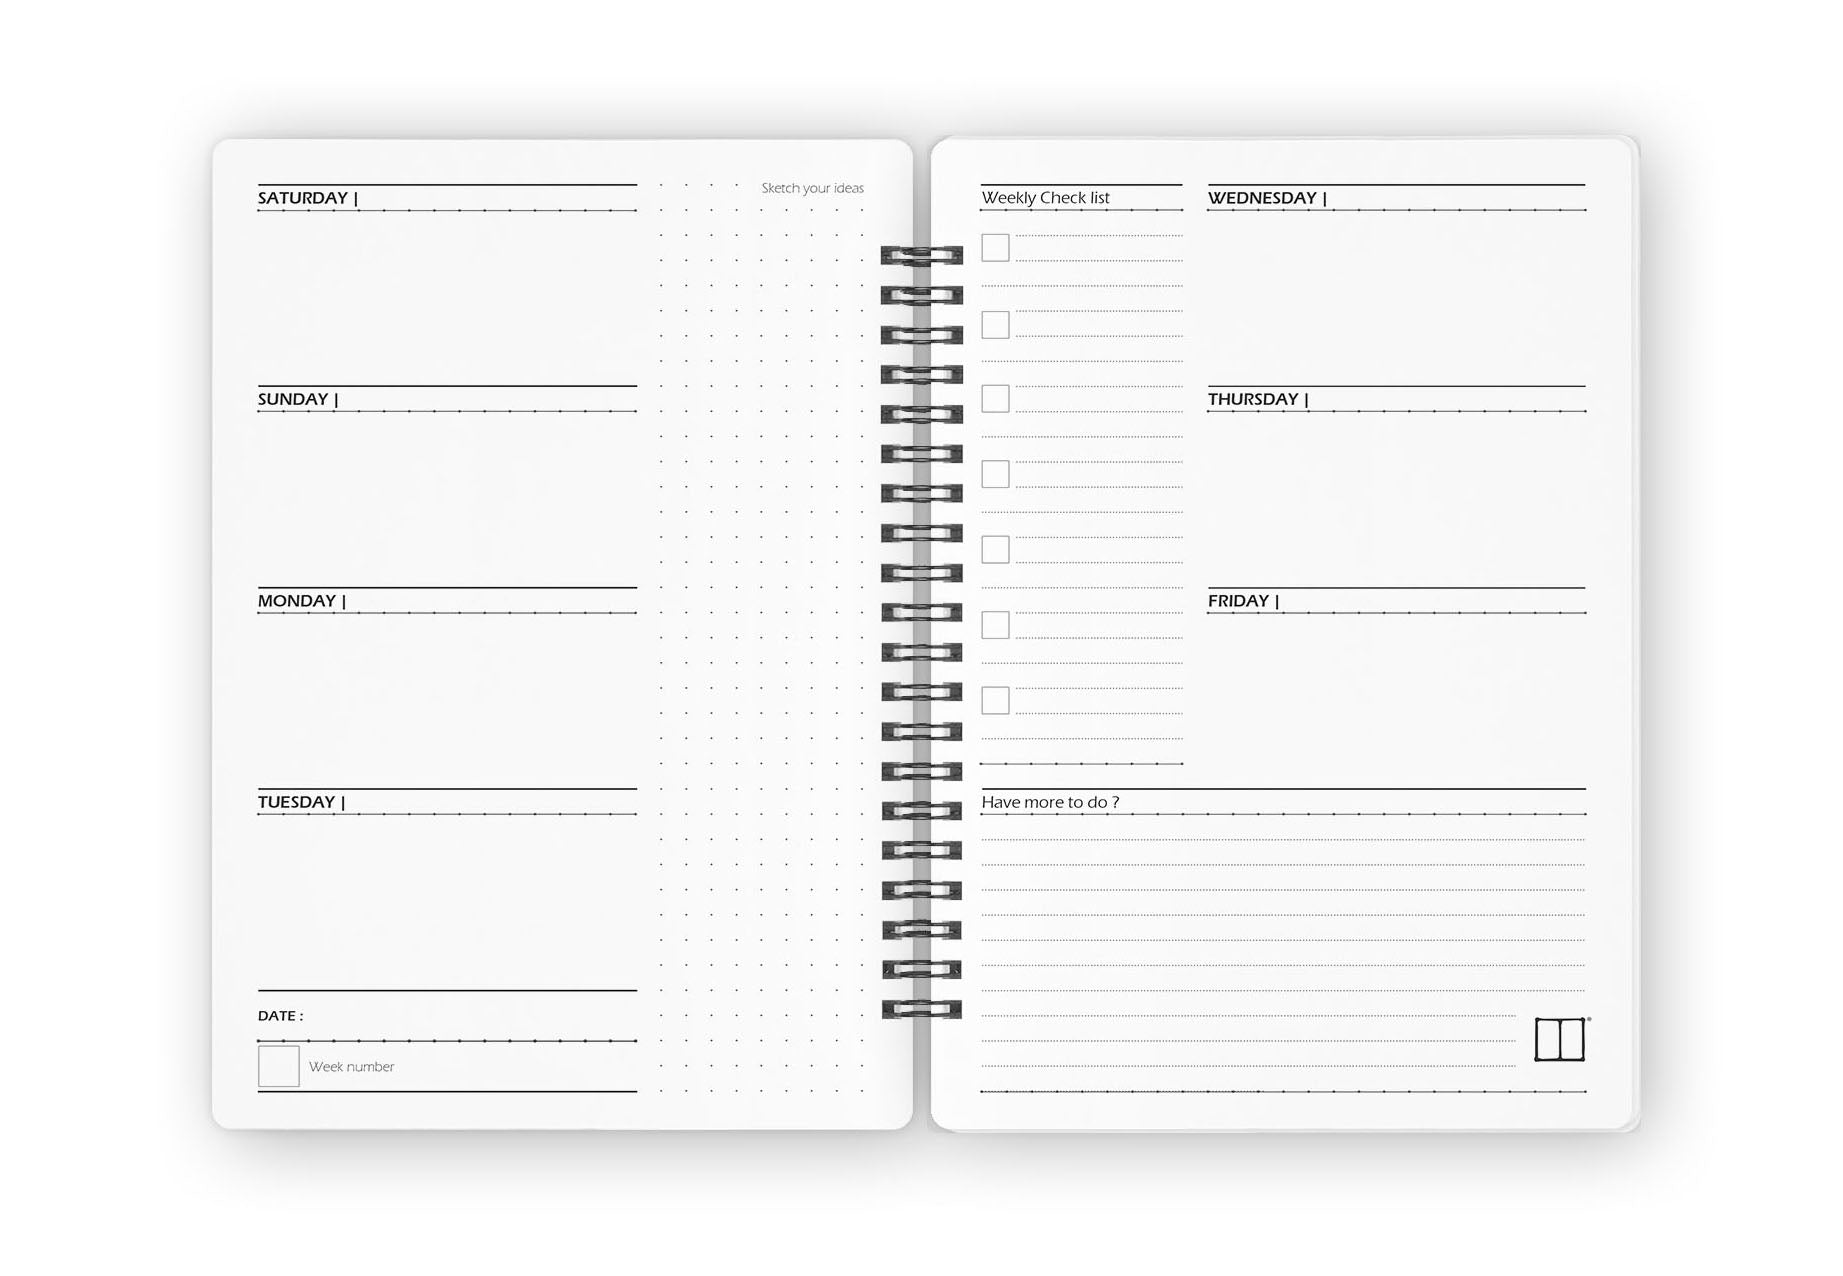 Weekly Planner Notebook | 20 X 14 cm - (52 Weeks + 50 Lined Pages) - Dream Catcher - from SketchBook Stationery